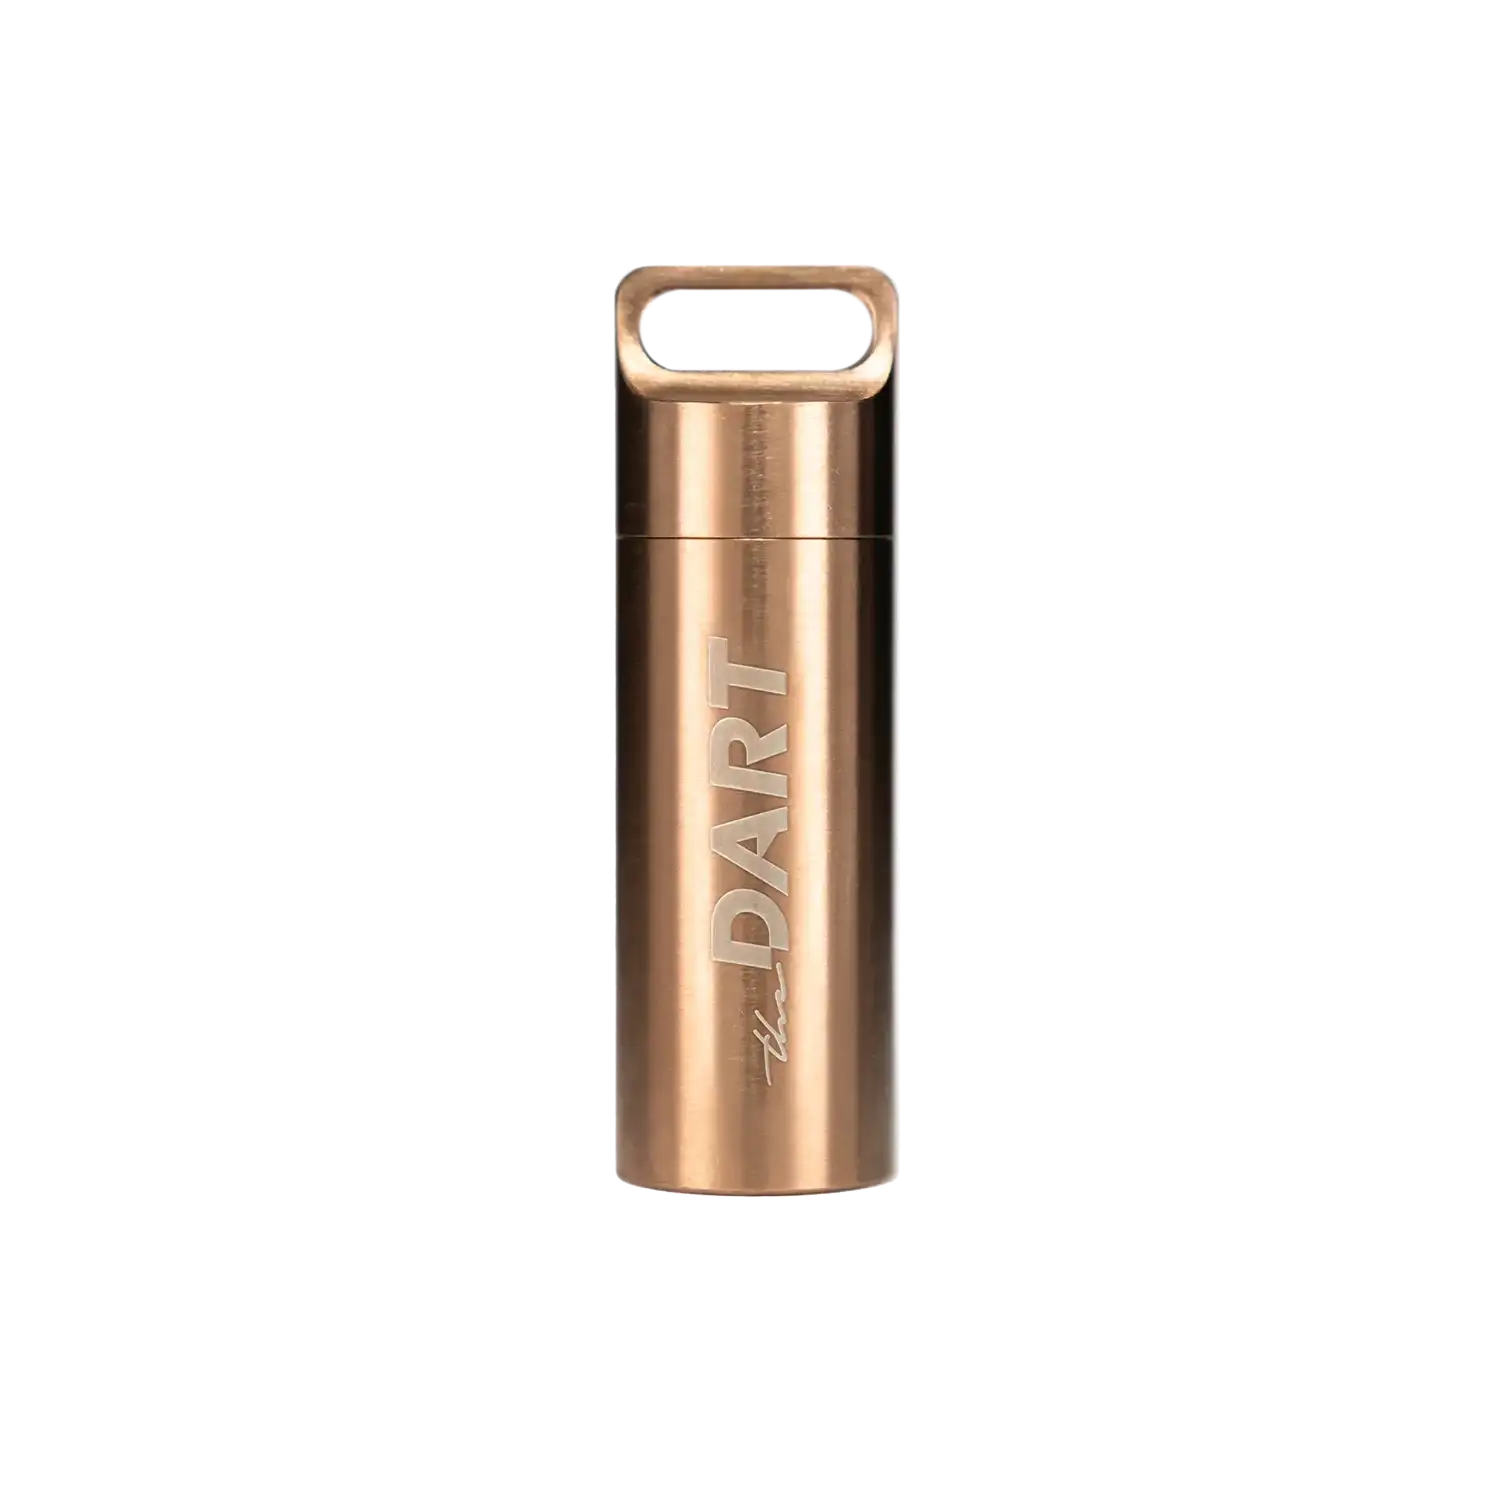 Image of Premium Canister (Bronze) - 3.5g